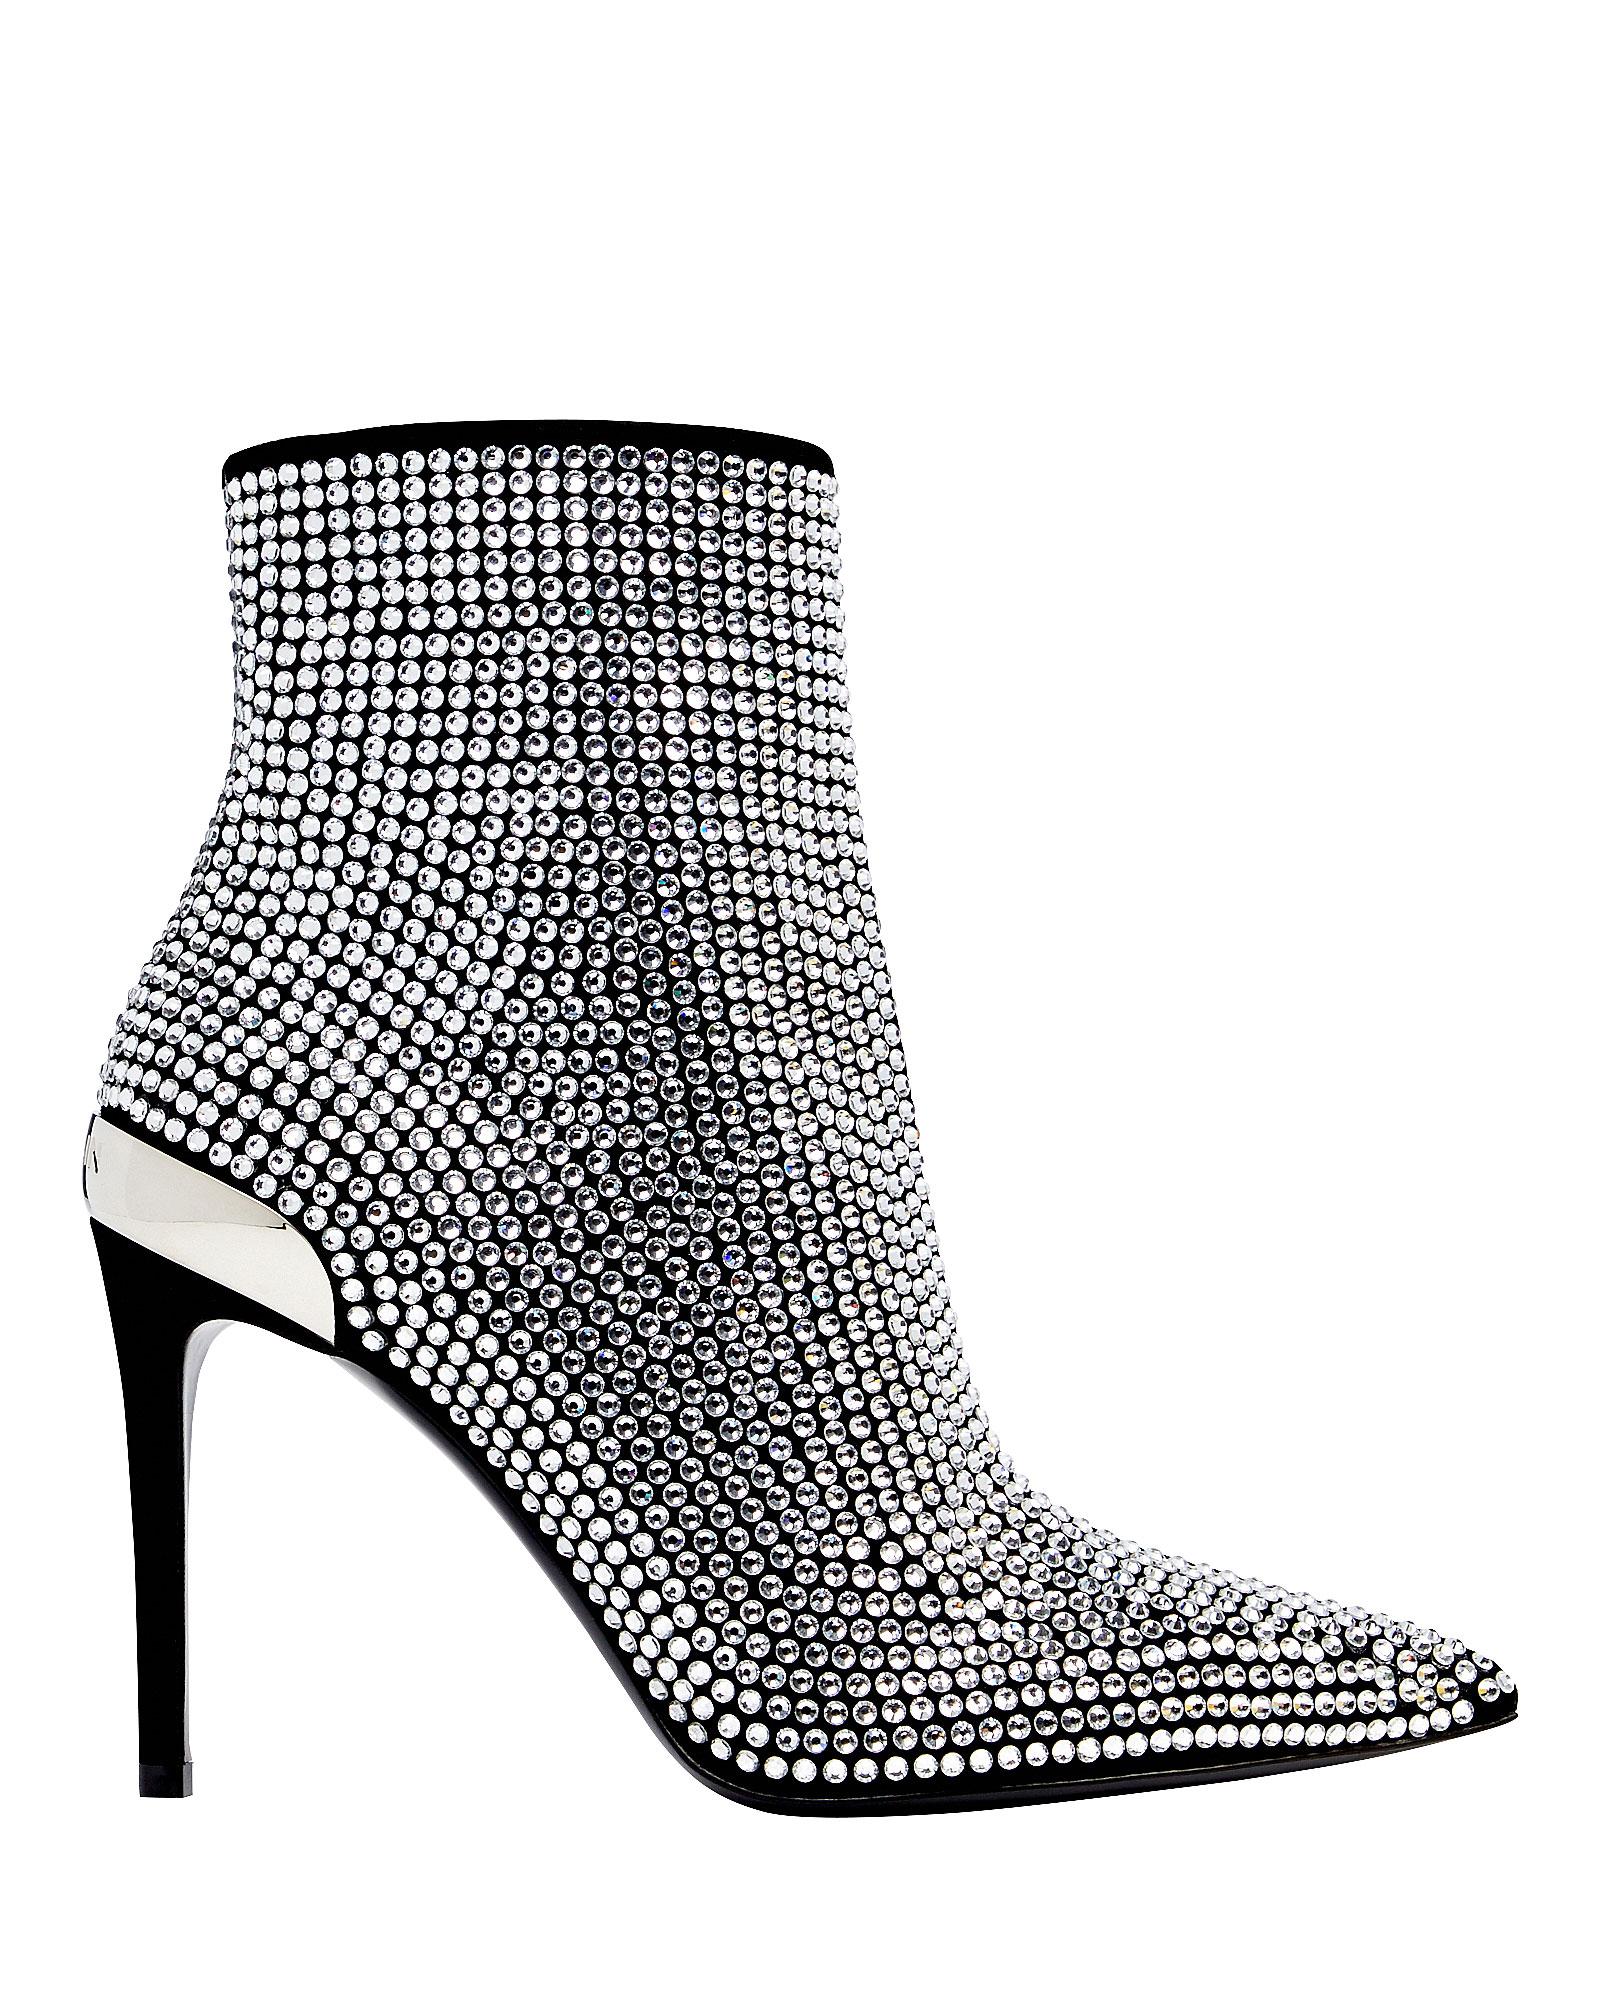 Crystal-Embellished Leather Booties